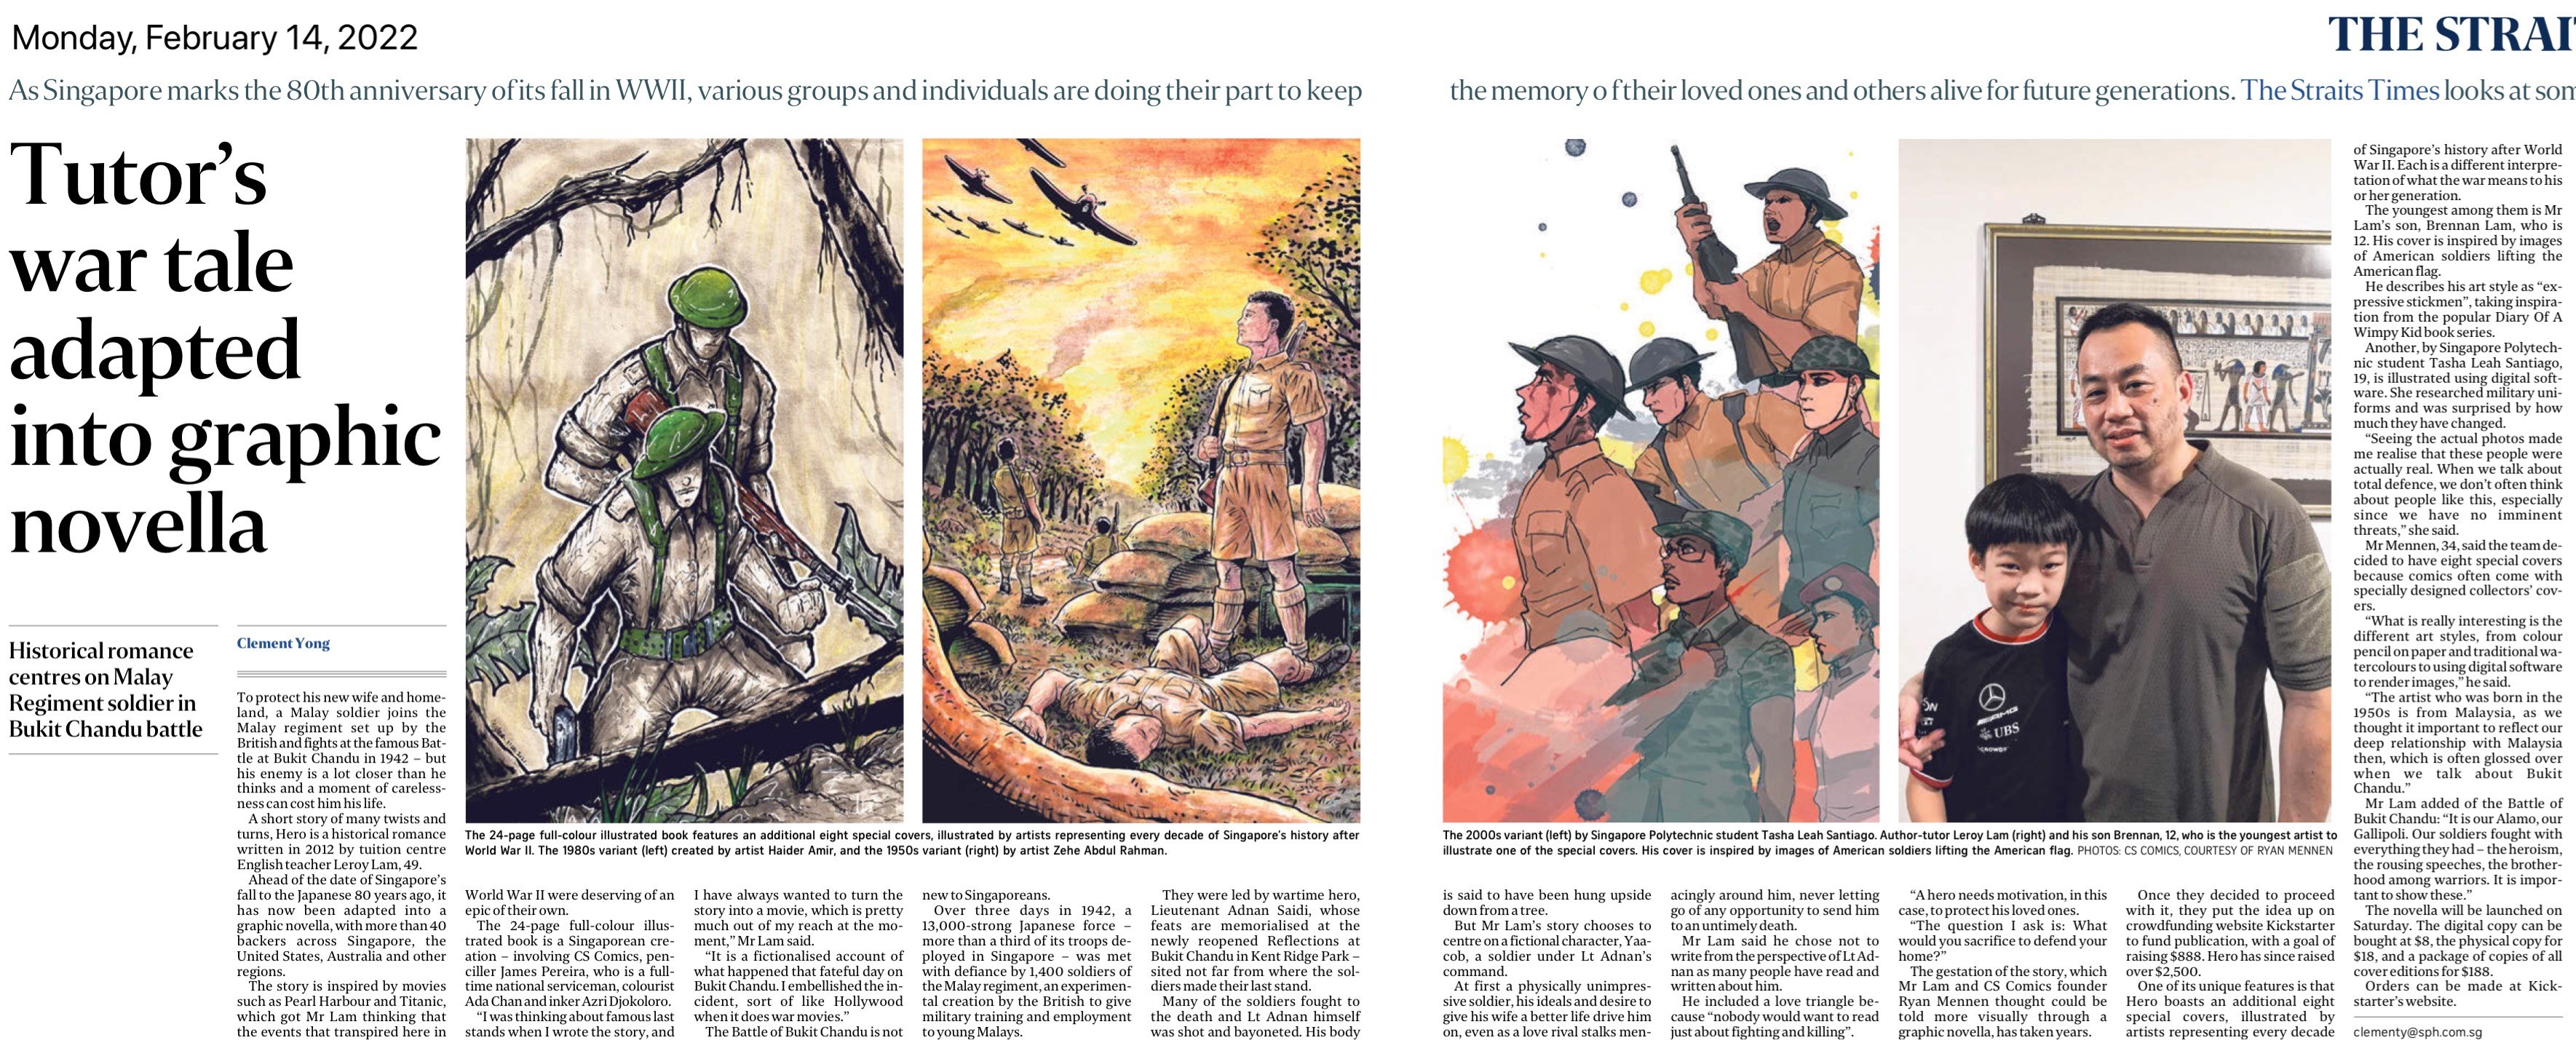 Tutor's war tale adapted into graphic novella - The Straits Times, 14 February 2022